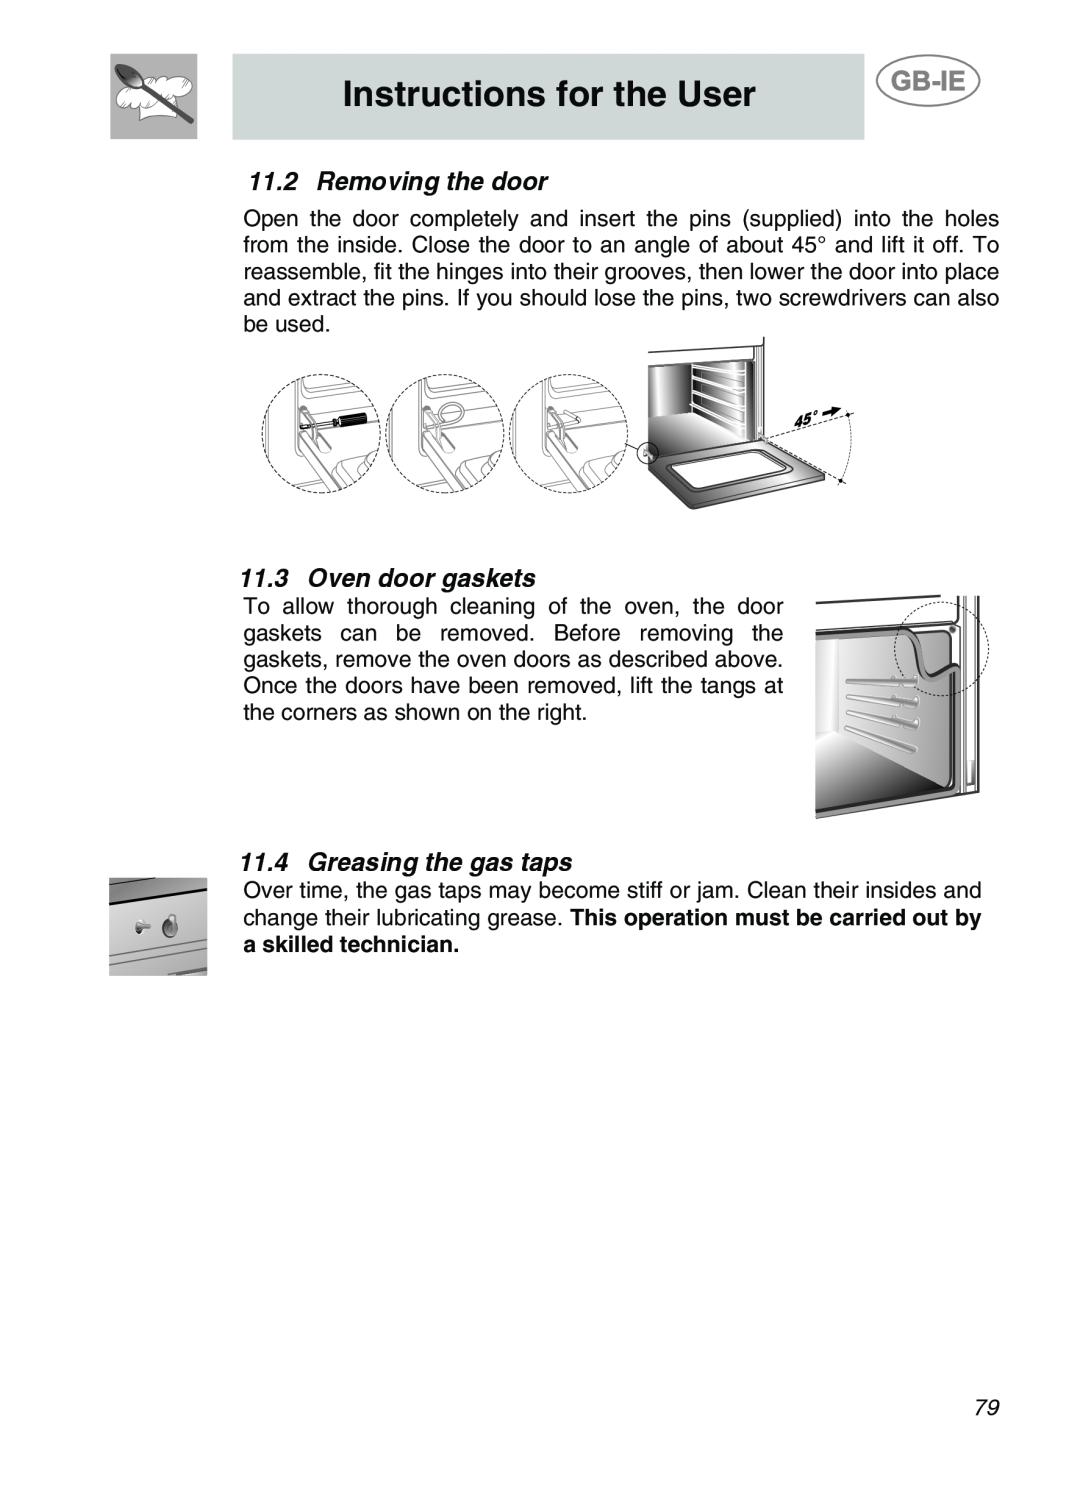 Smeg A2PY-6 manual Removing the door, Oven door gaskets, Greasing the gas taps, Instructions for the User 